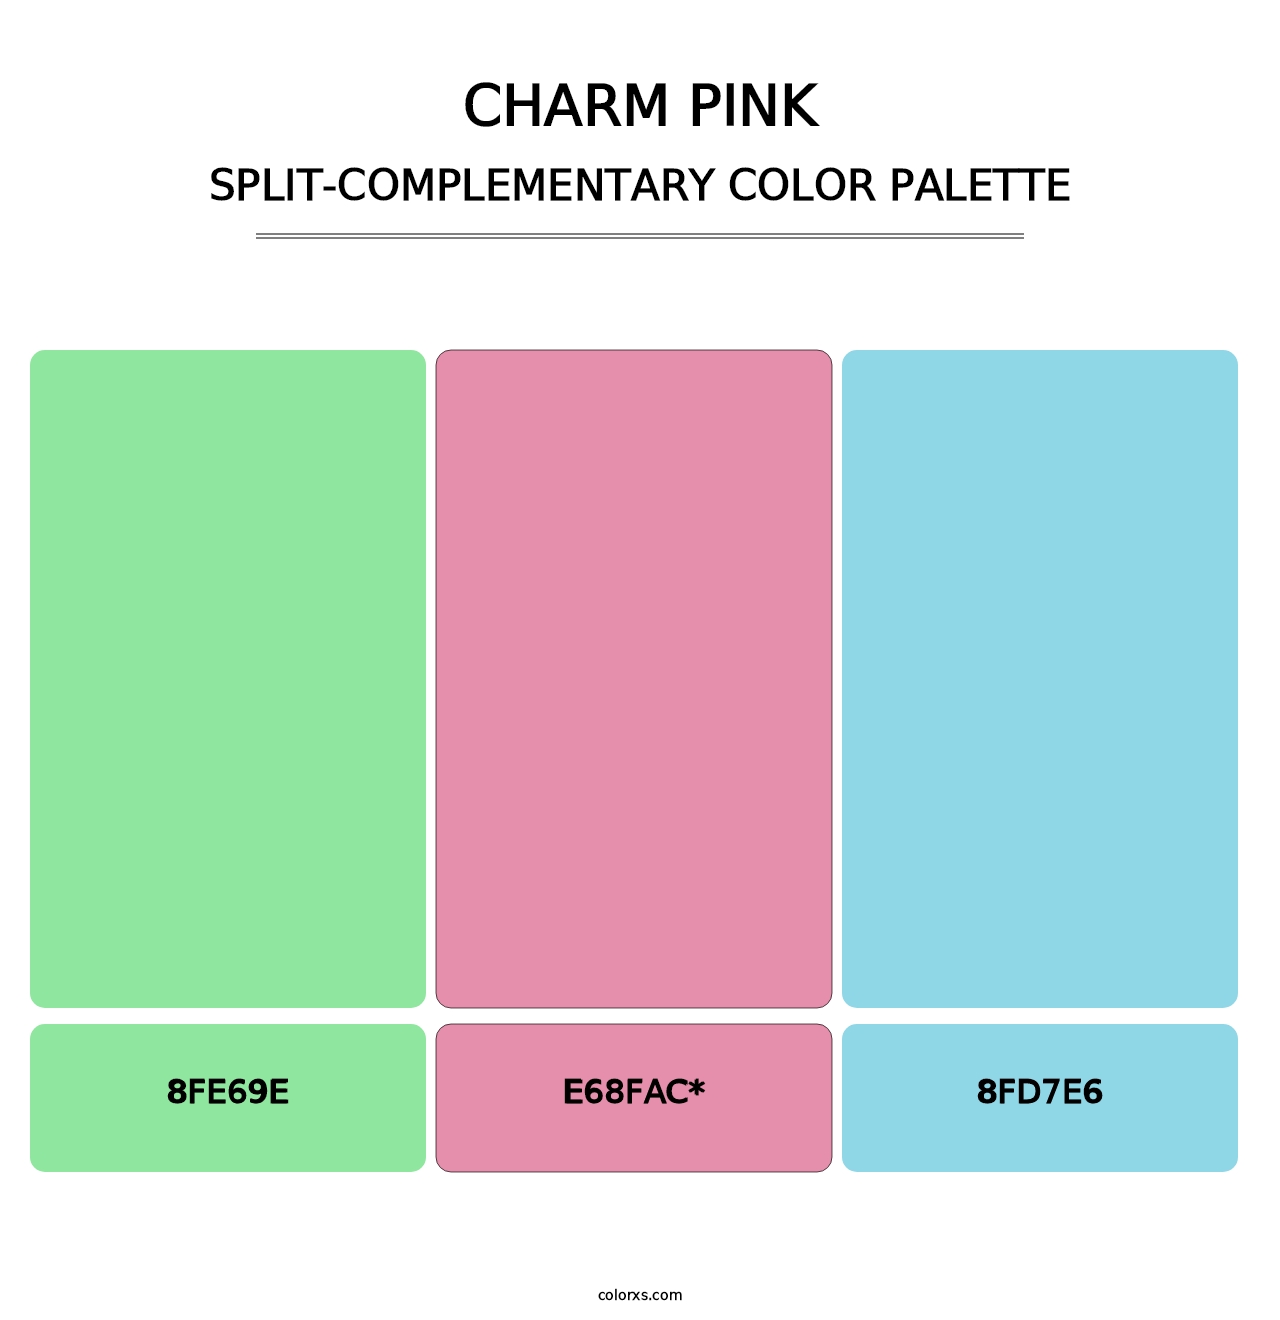 Charm Pink - Split-Complementary Color Palette